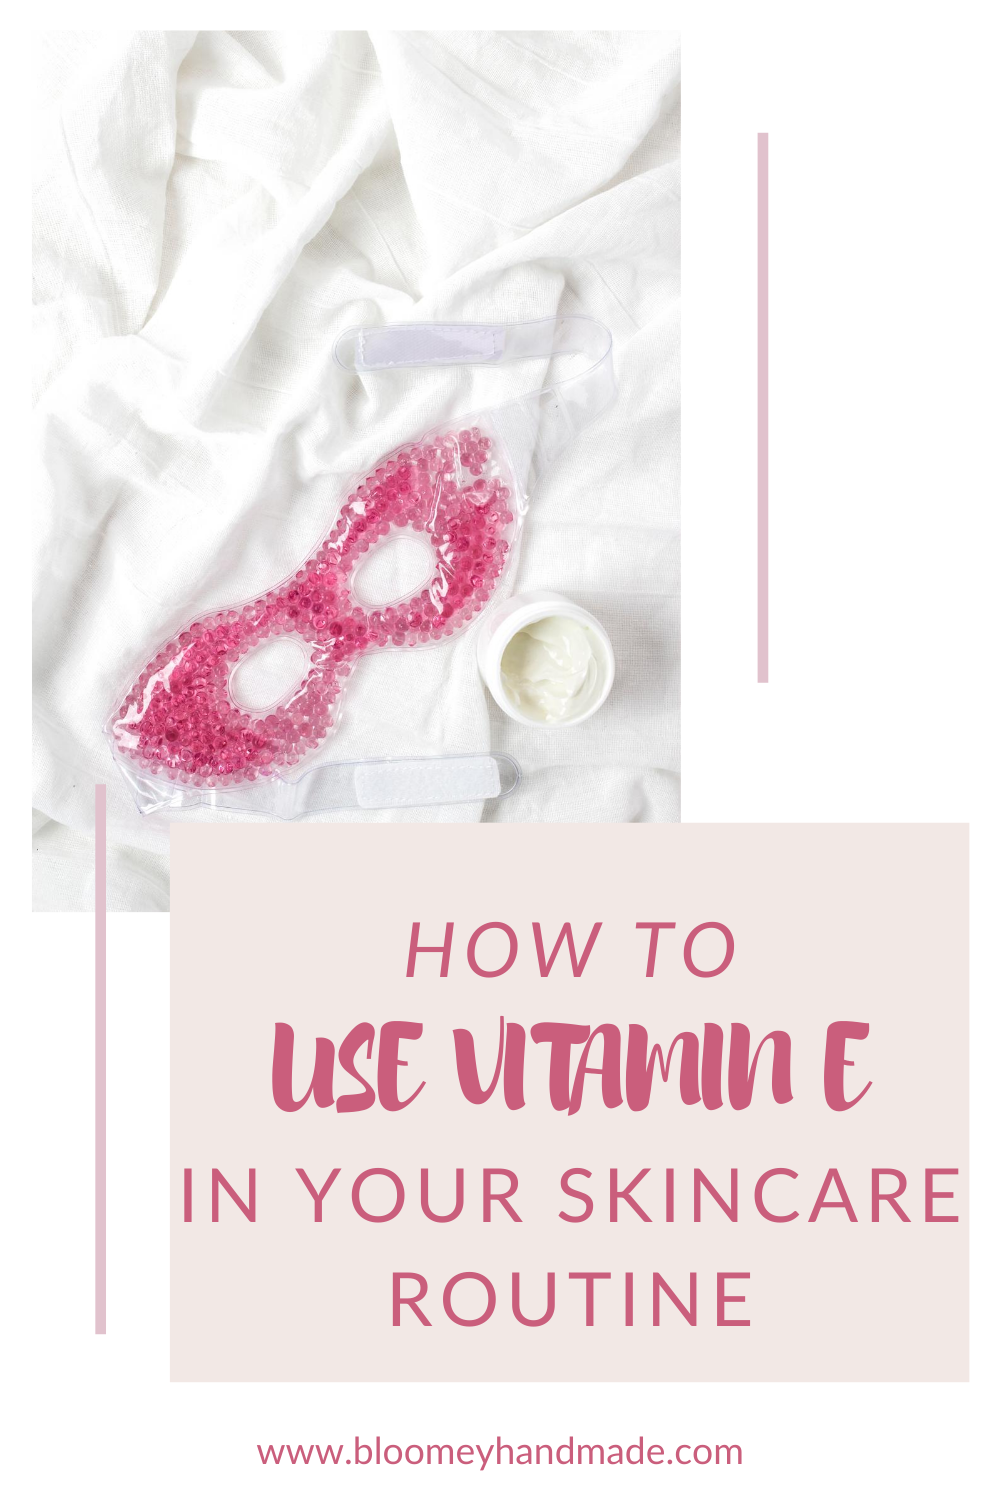 How To Incorporate Vitamin E in You Daily Skincare Routine & Get The Best Results